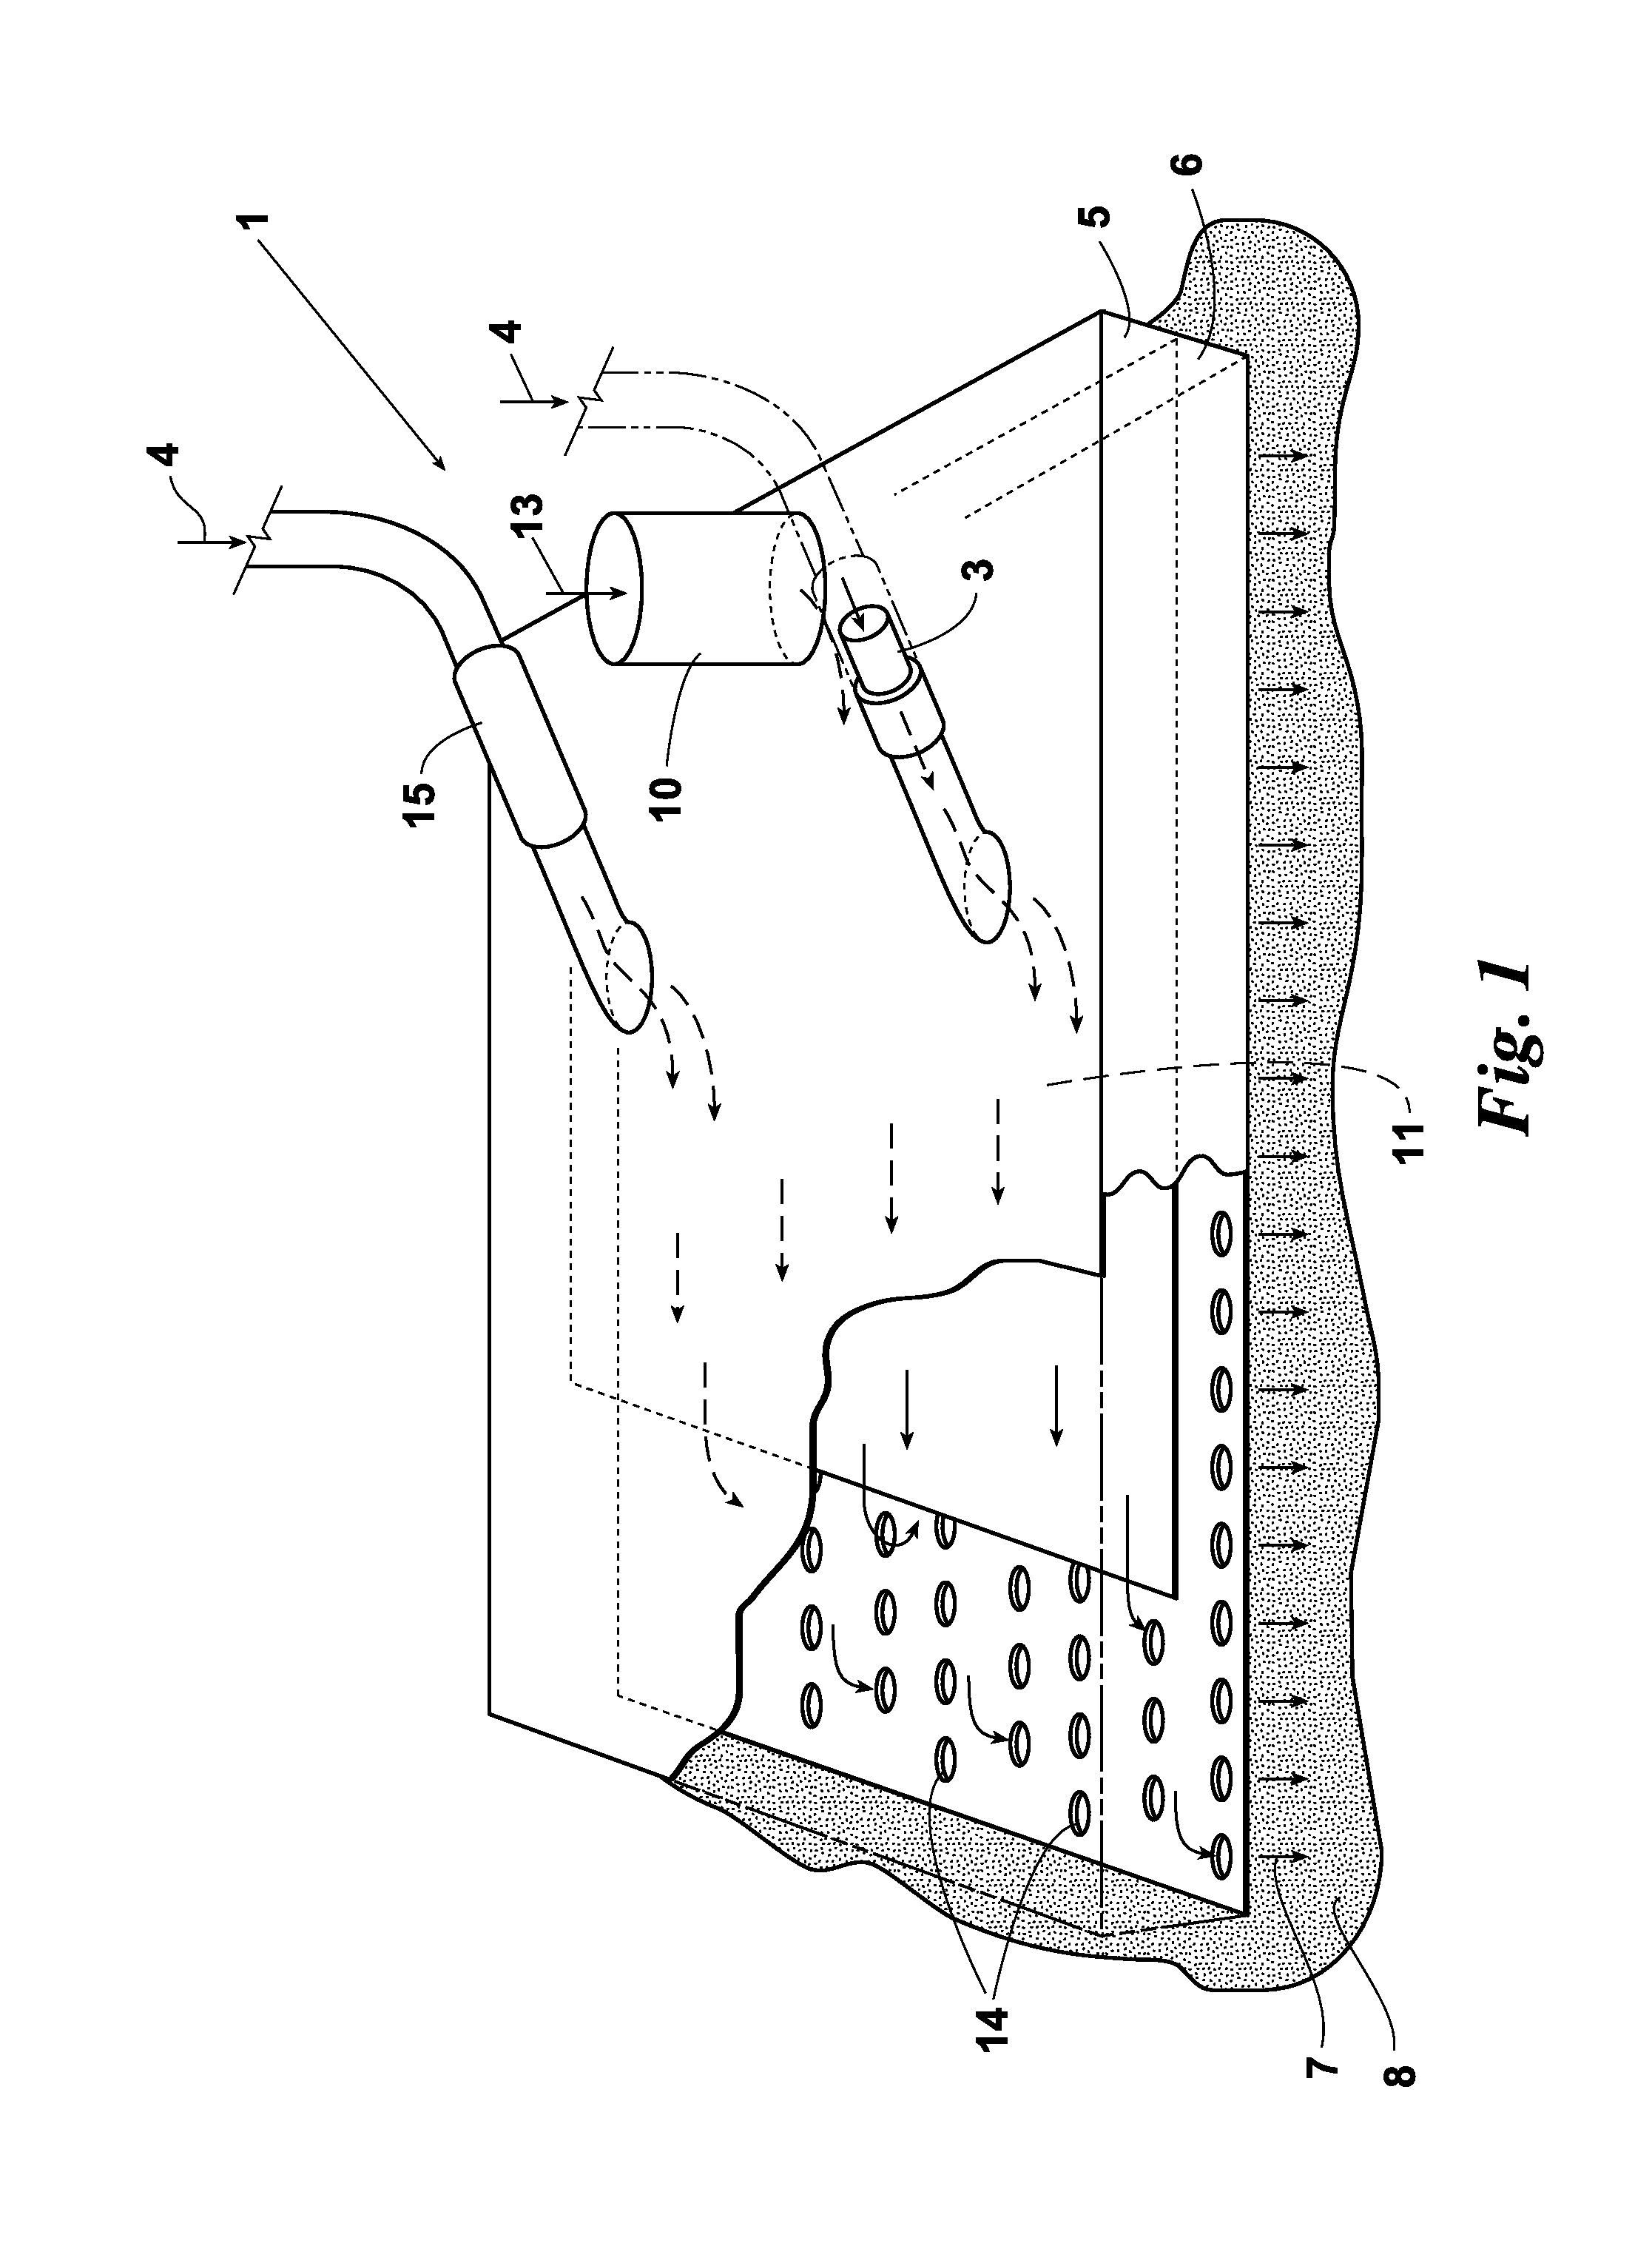 Engine Exhaust-Driven Heating Device for Use in Portable Surface Drying Equipment